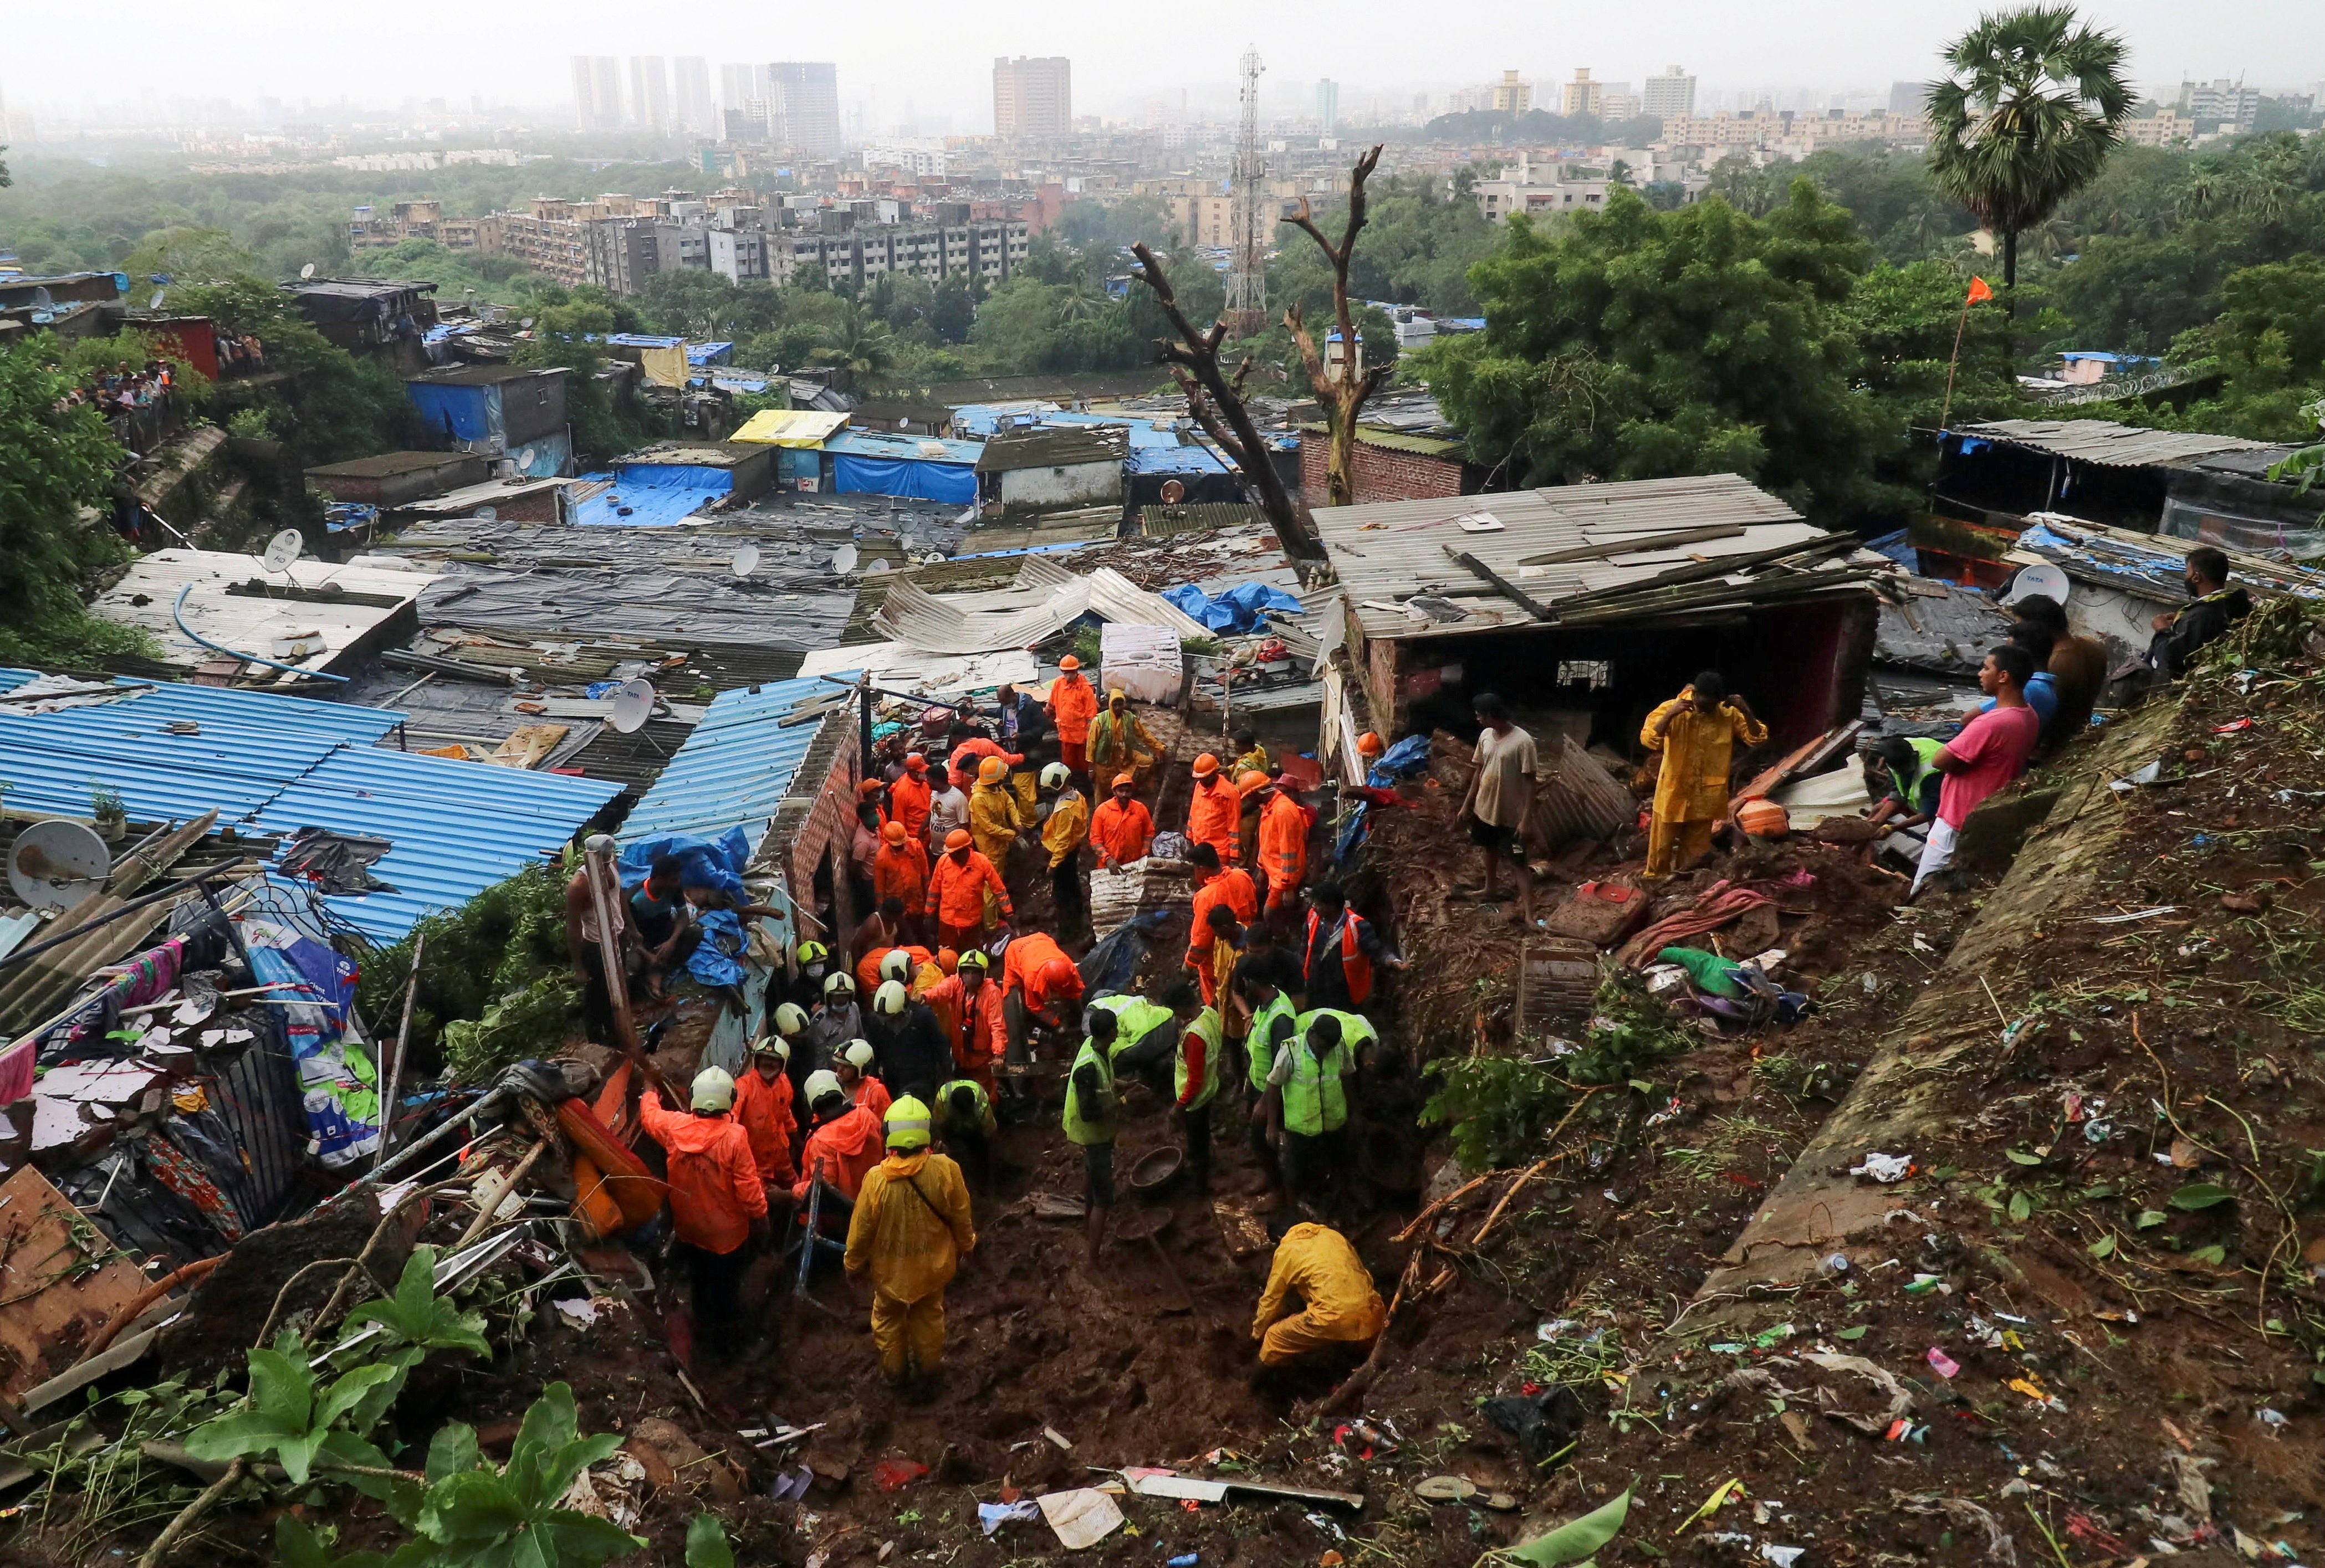 Rescue workers search for survivors after house collapse due to landslide in Mumbai